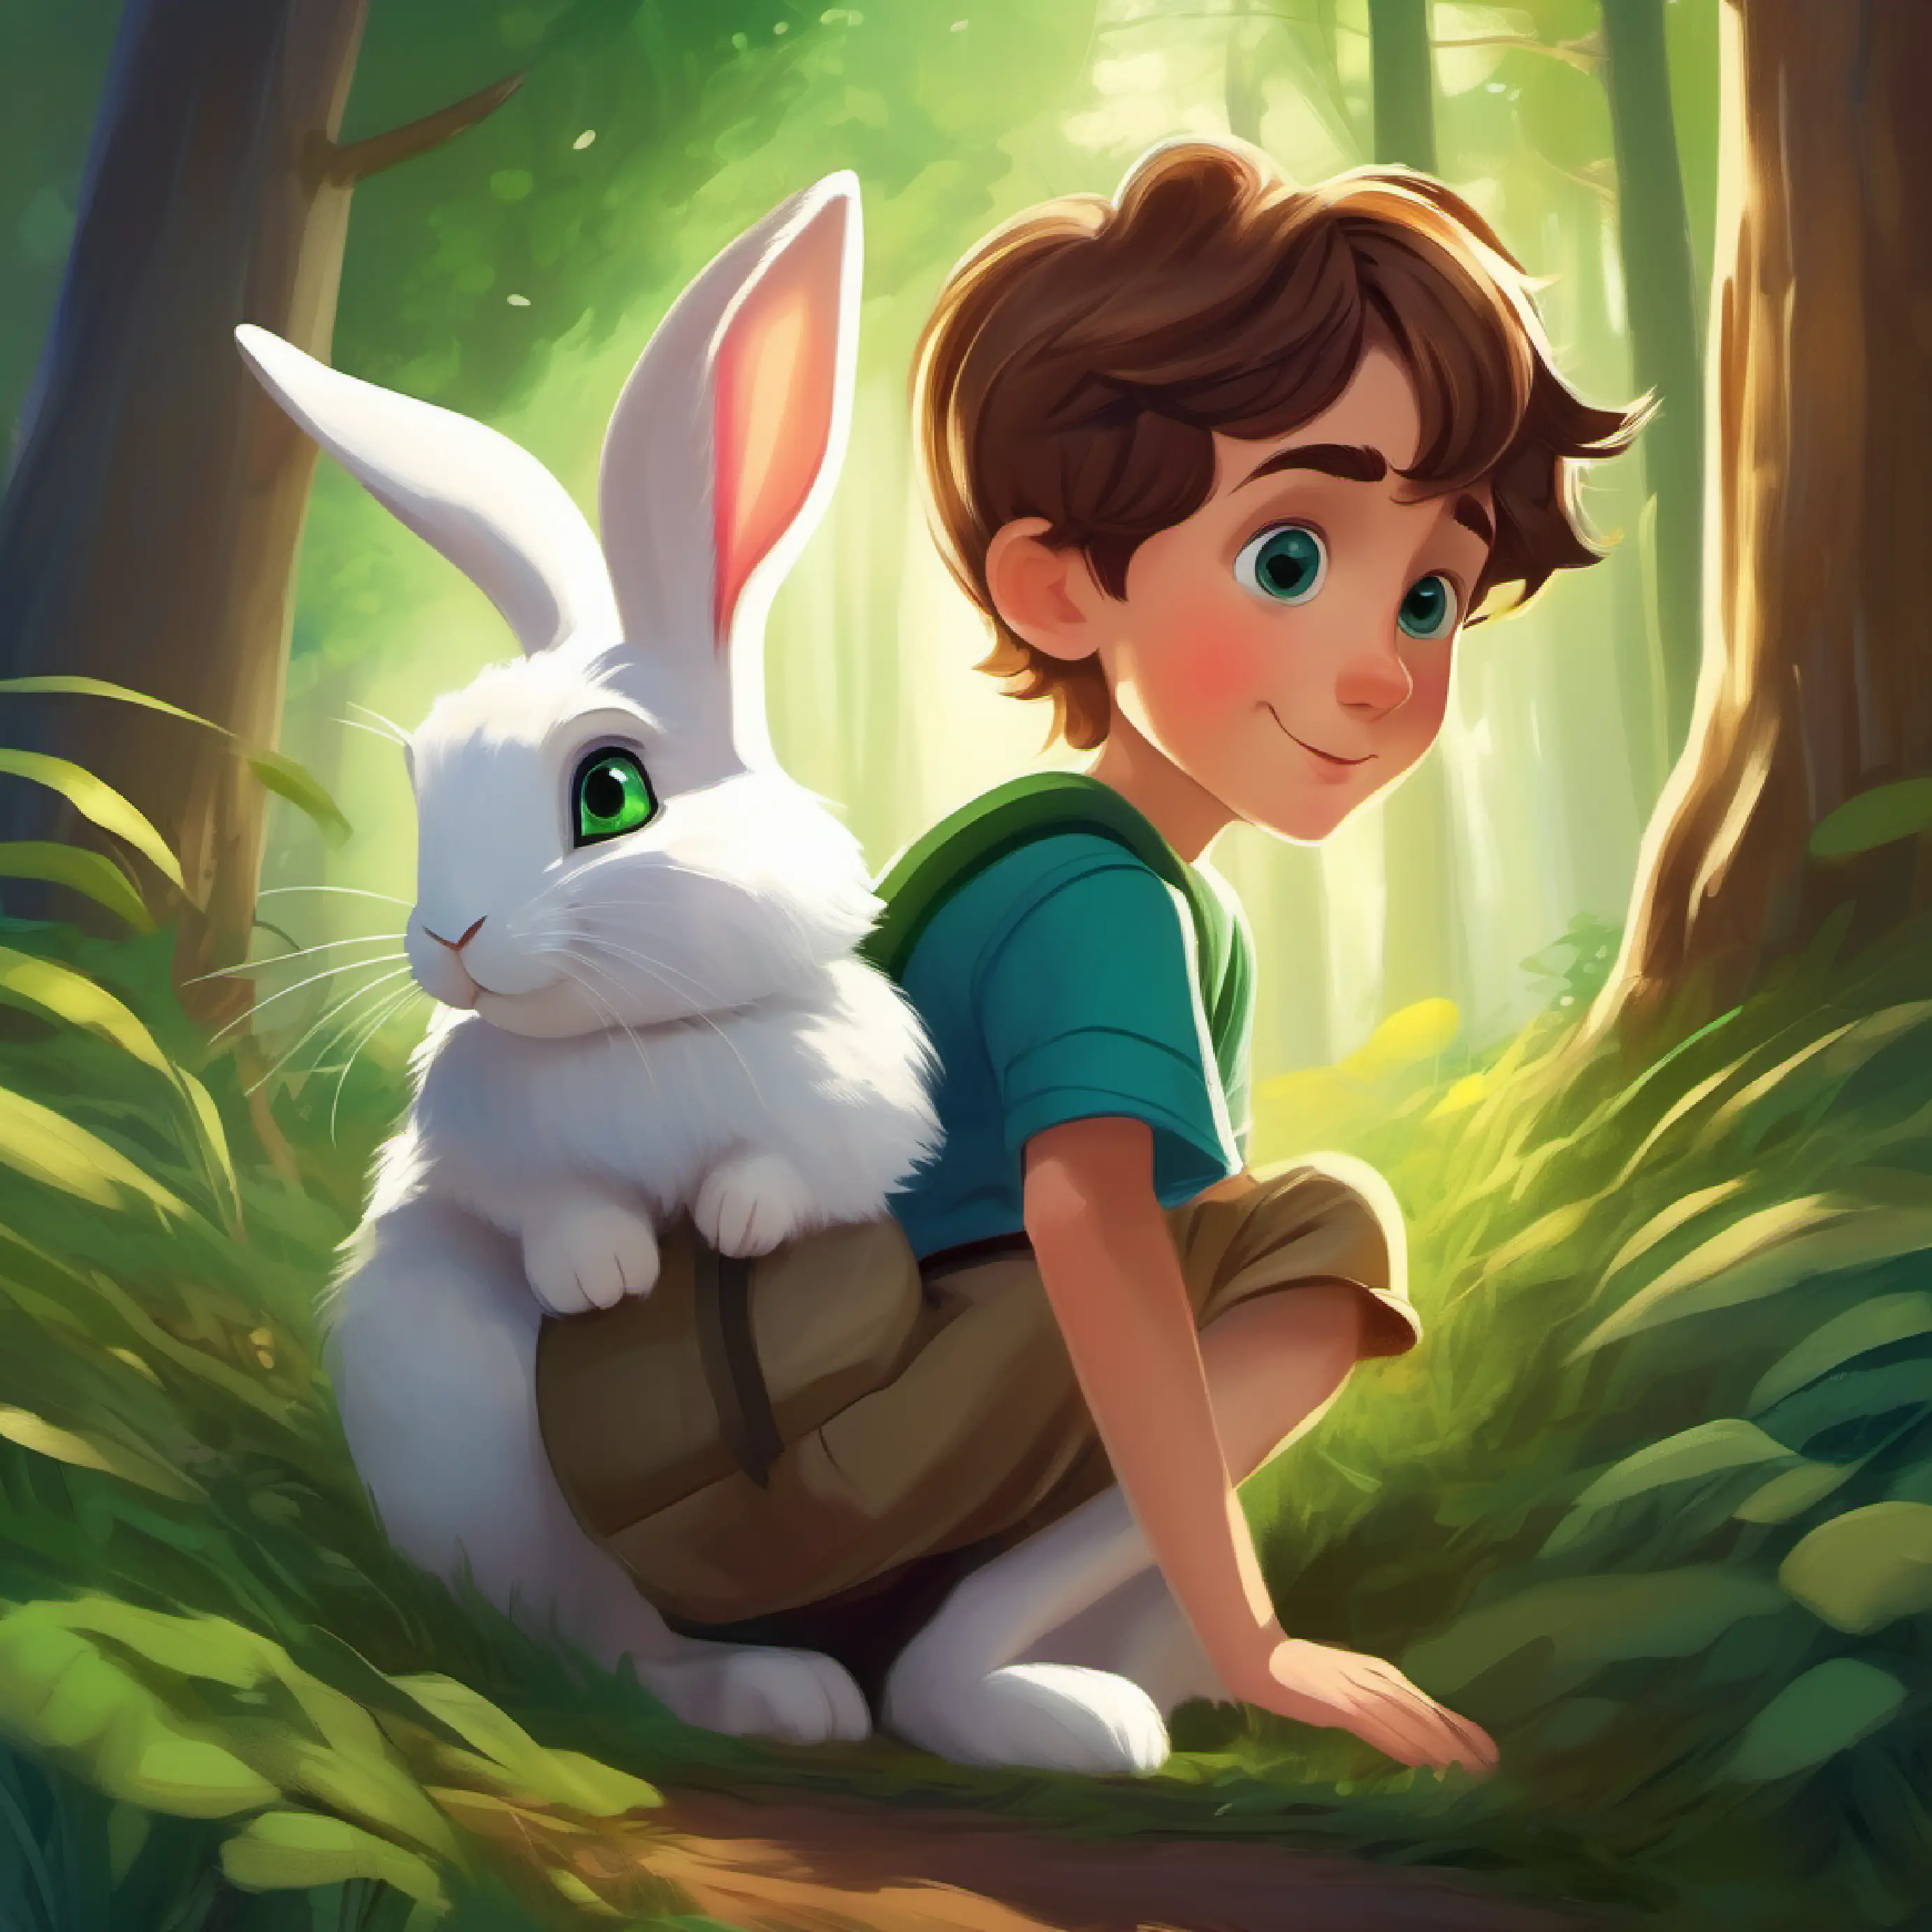 Curious boy, short brown hair, green eyes, adventurous spirit meets White rabbit, fluffy, big blue eyes, friendly and playful the rabbit, magical encounter in the forest